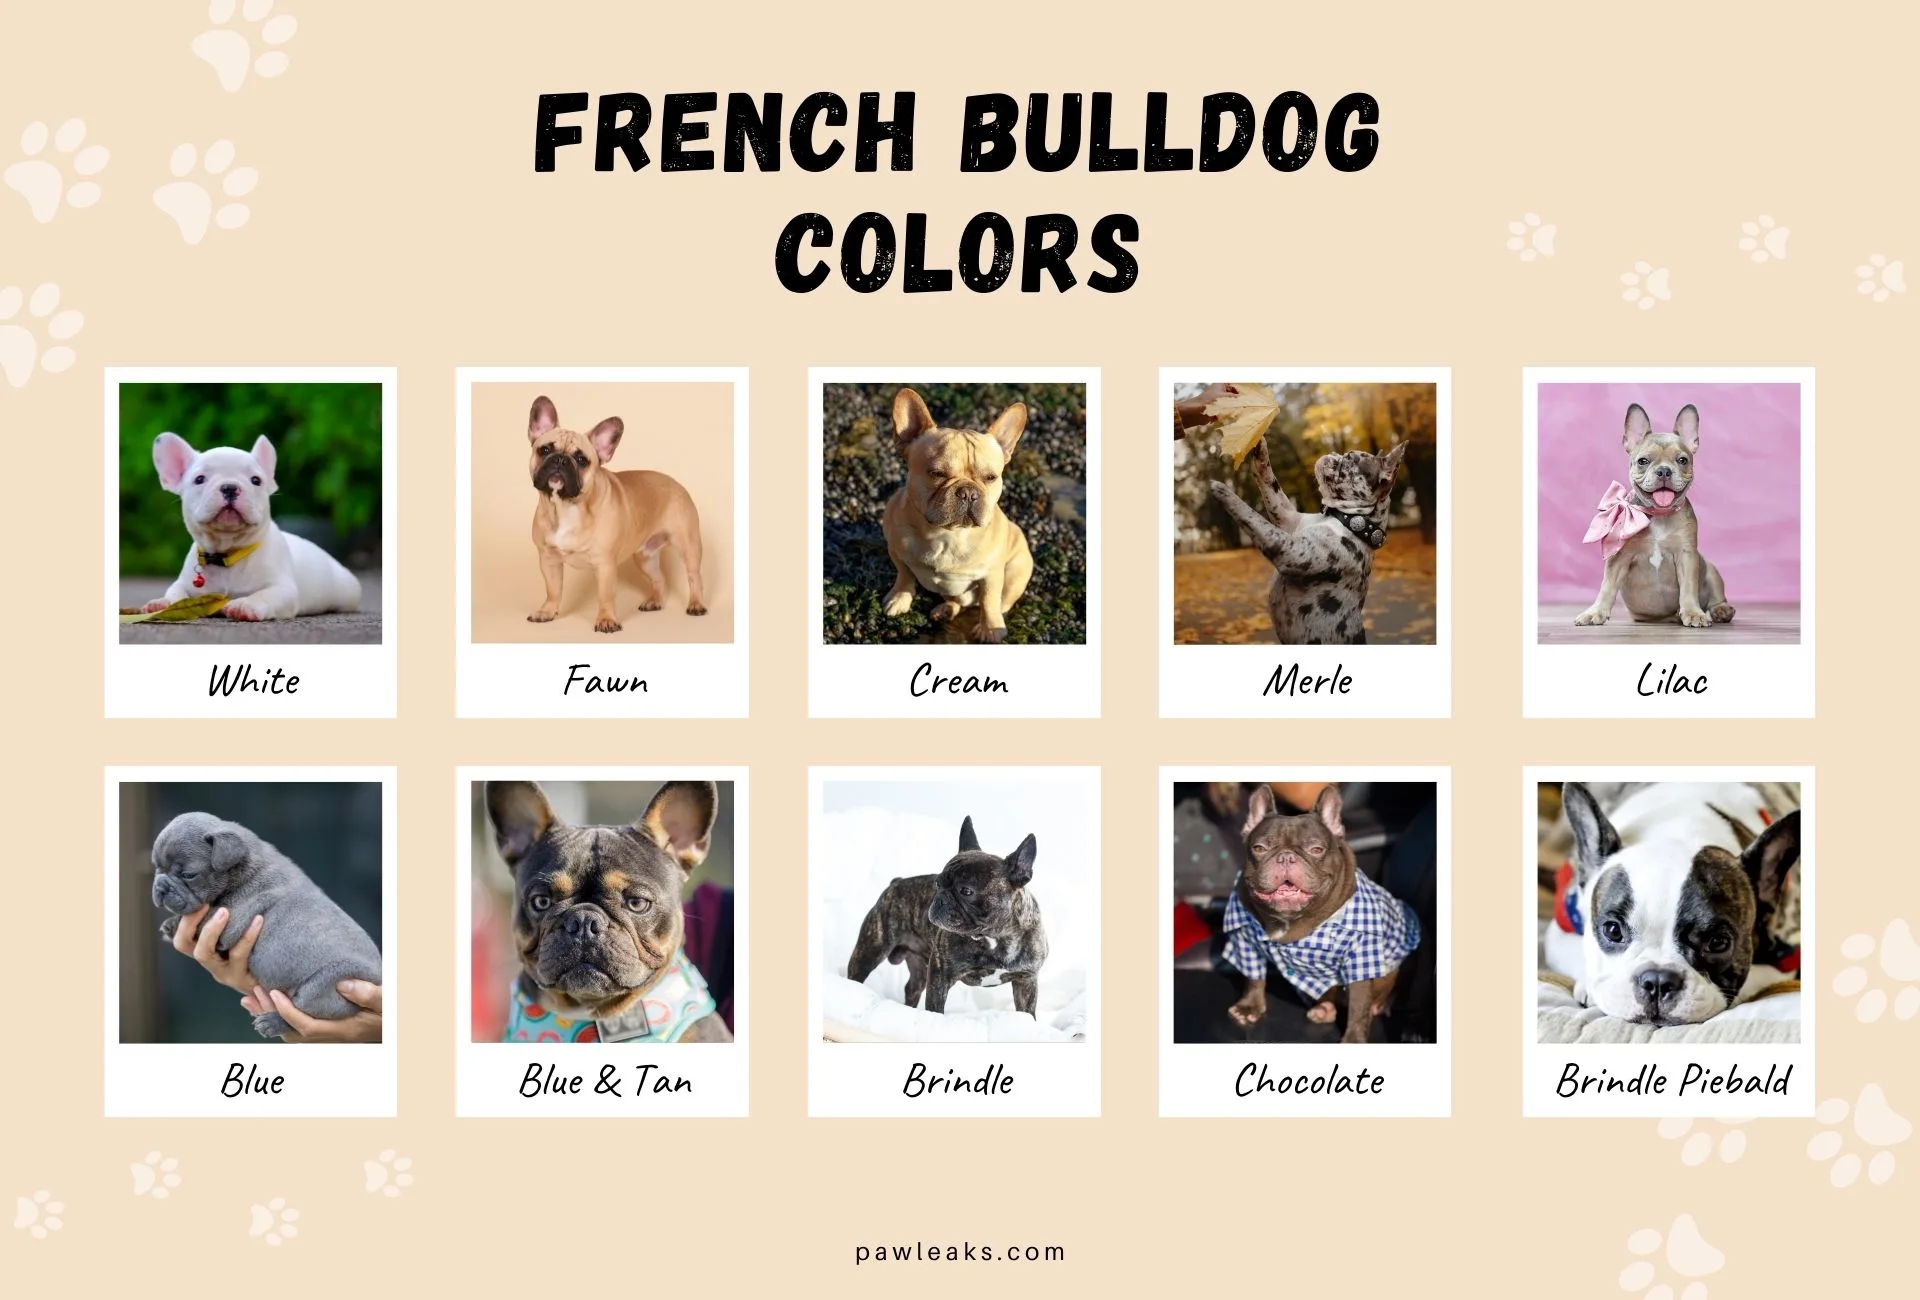 The Unique Coat Color of the Chocolate Brindle French Bulldog